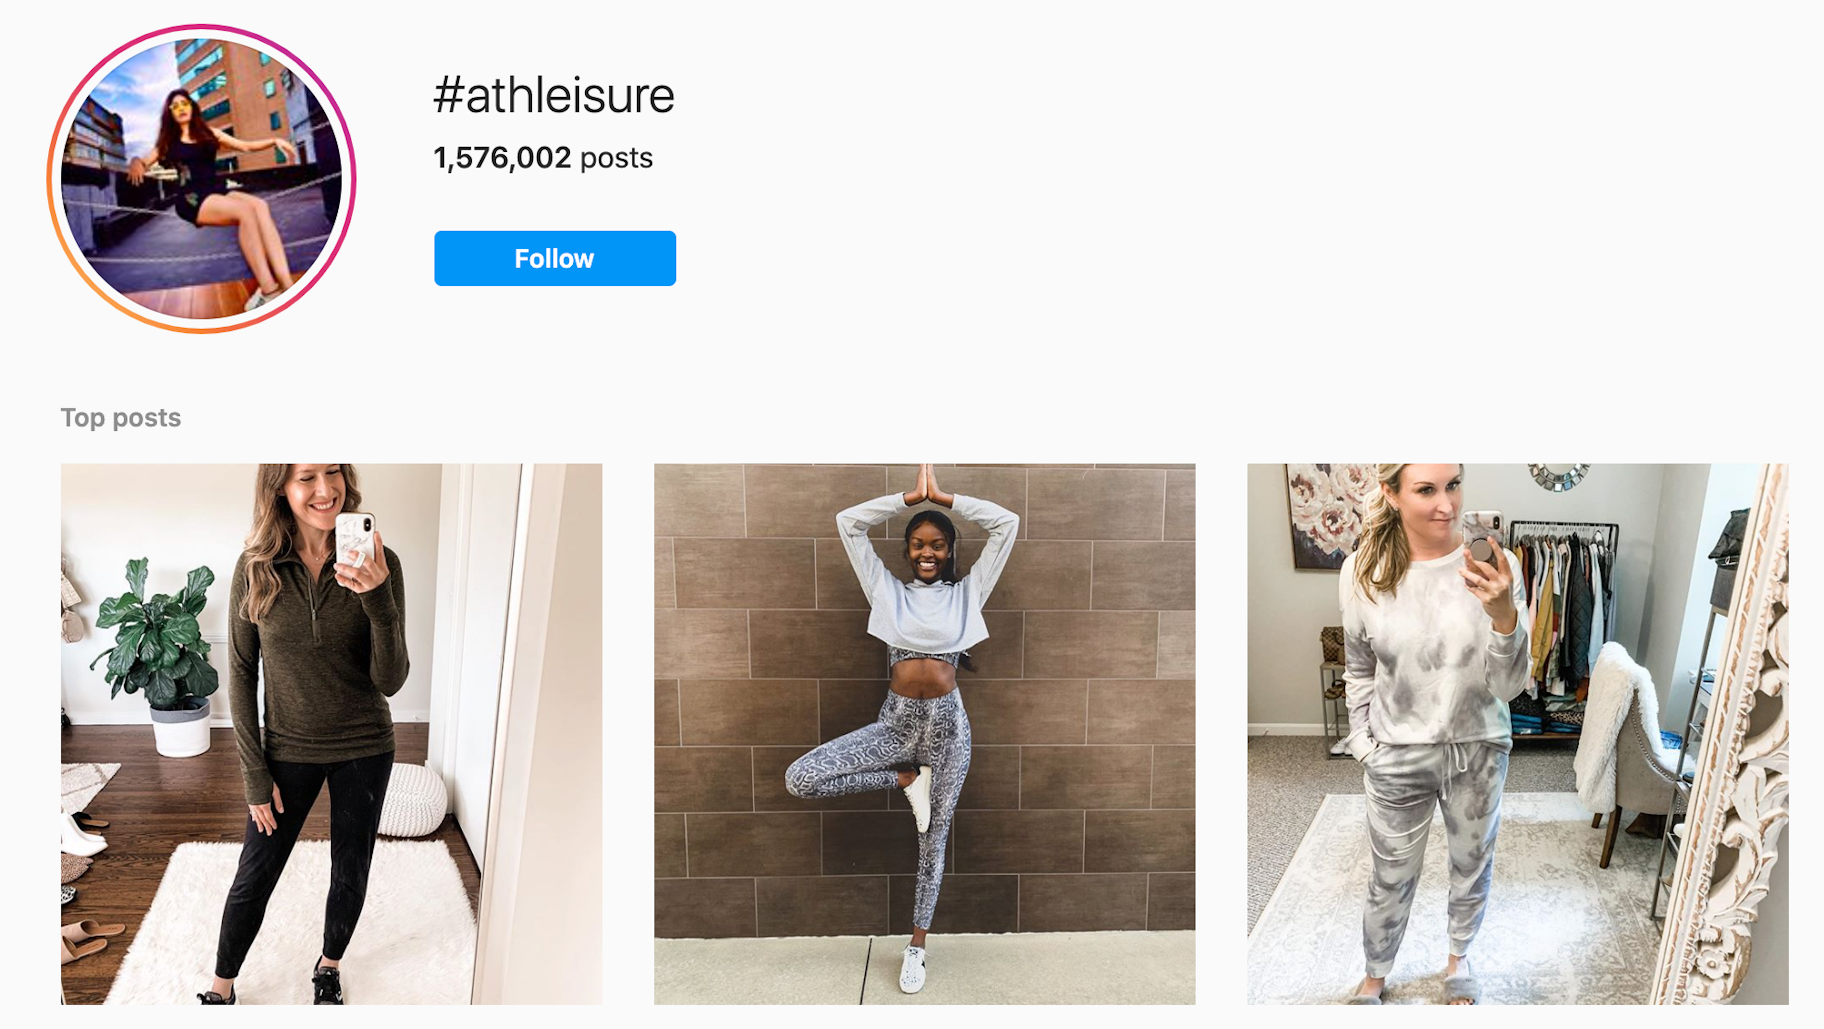 marketing athleisure products